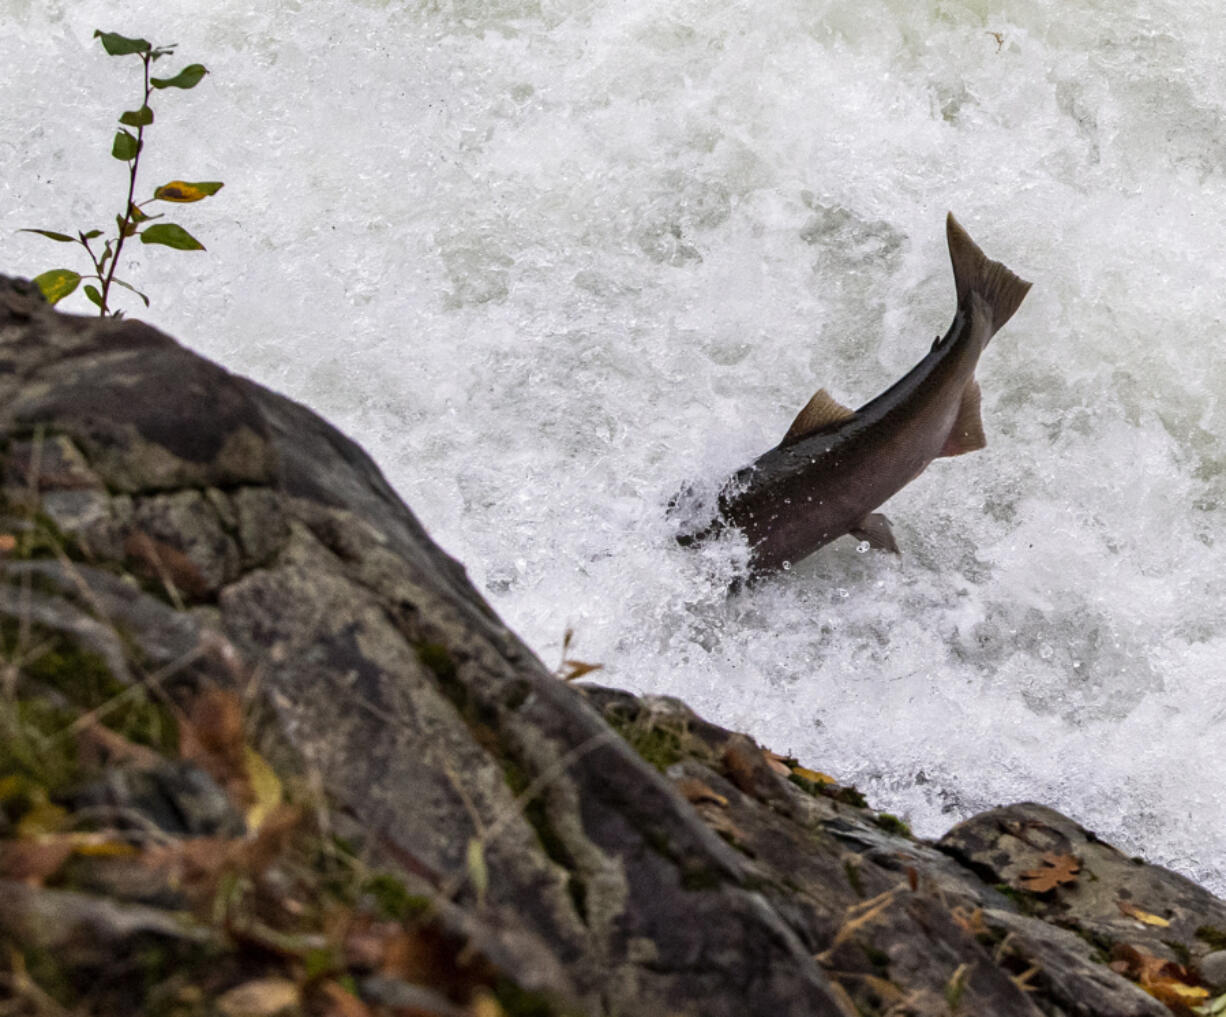 A fish dives headfirst into Lucia Falls on Thursday. After a summer of drought, the water has risen, providing habitat for native fish.